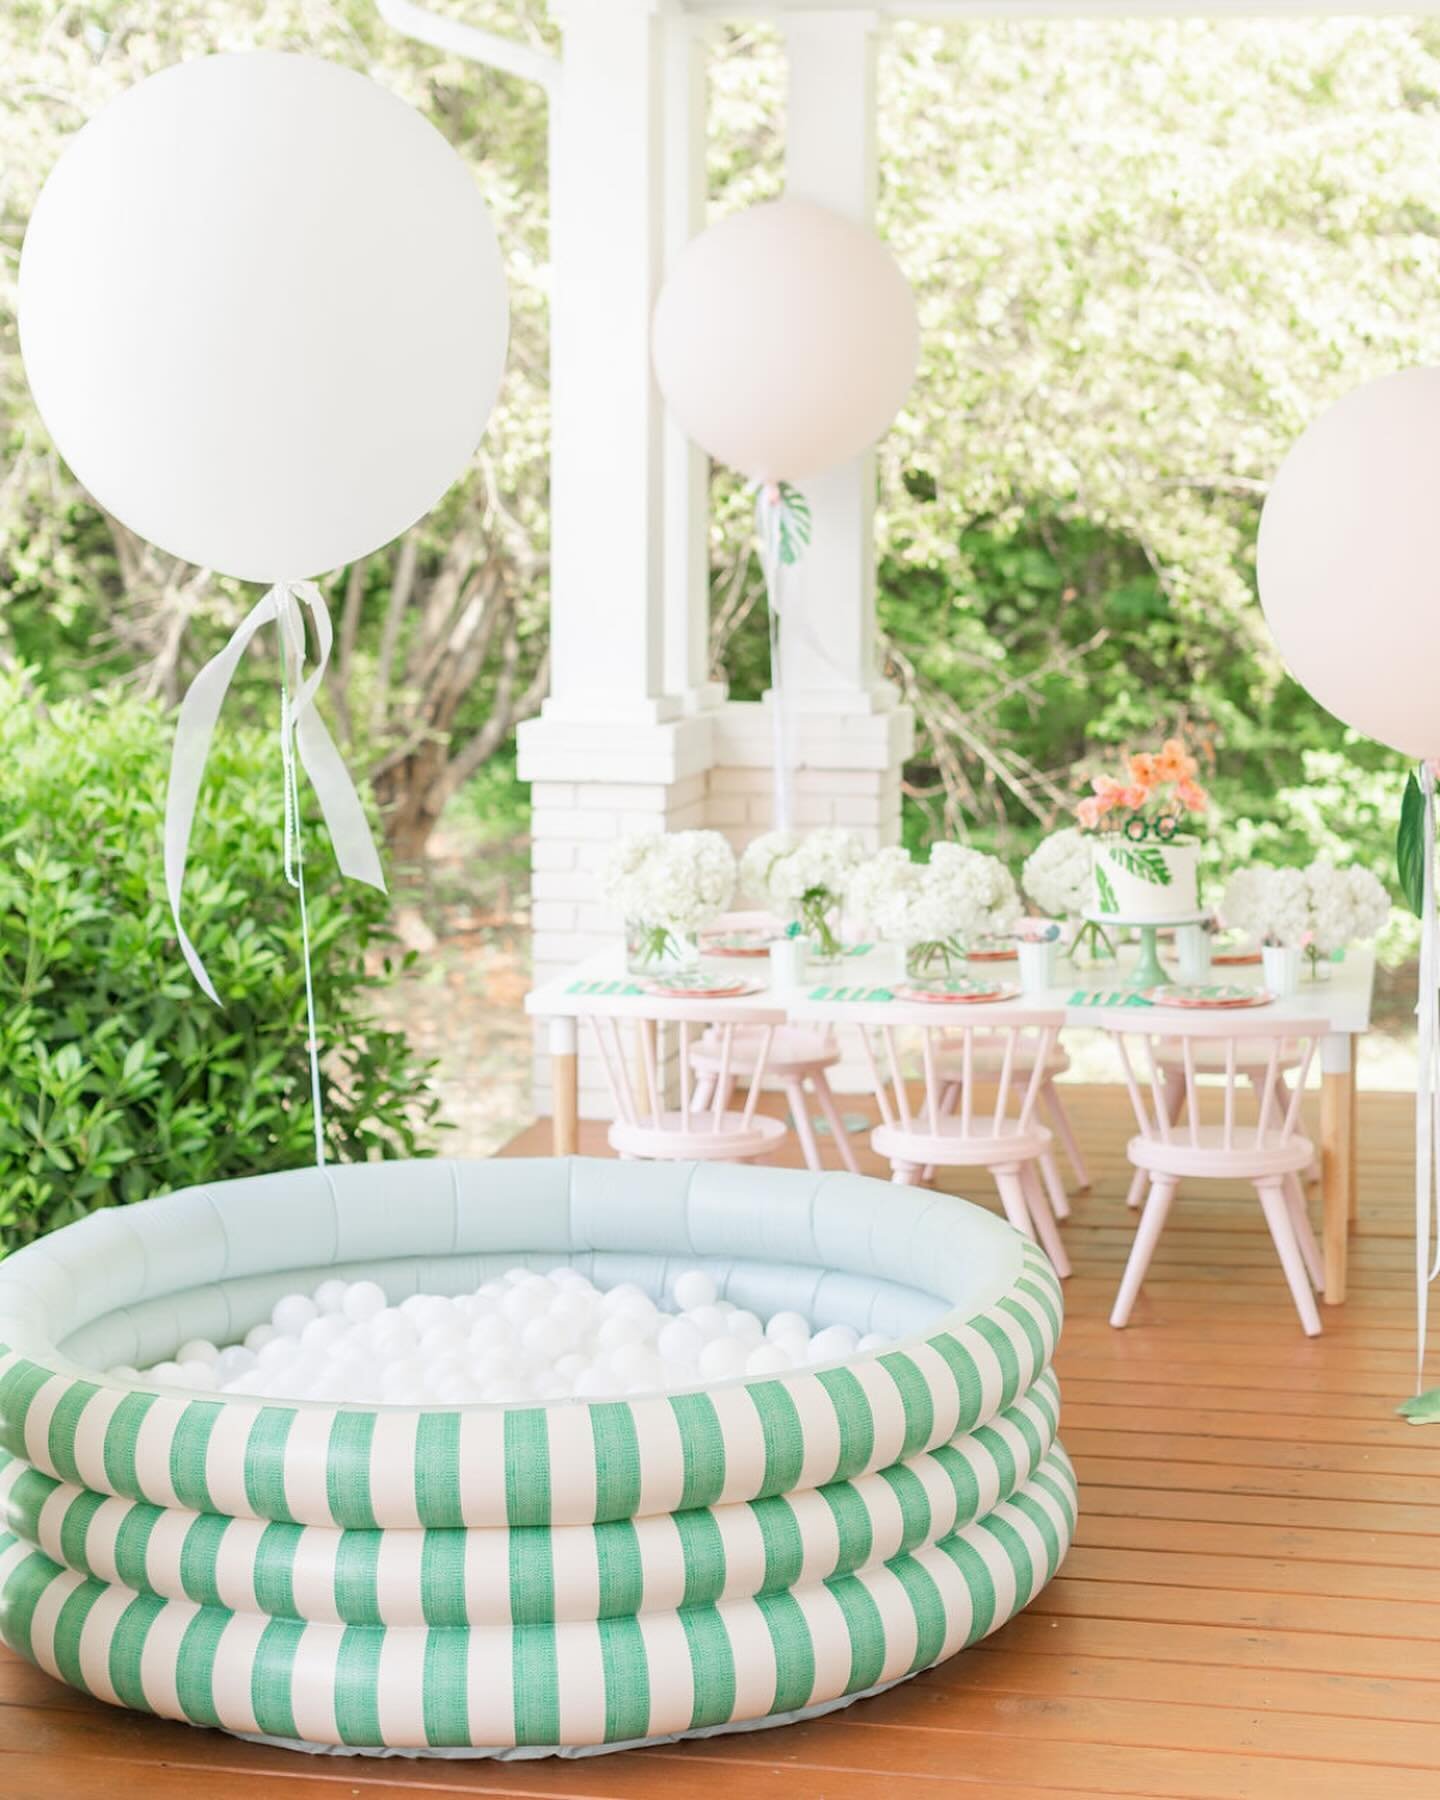 Calling all beach bums and sun seekers🌴☀️

Pack your beach towels and sunscreen, because we&rsquo;re turning up the heat at our beach cabana party!

Anyone need a fun summer themed party? Because we are OBSESSED with this one 🤩

Event Design @jorda